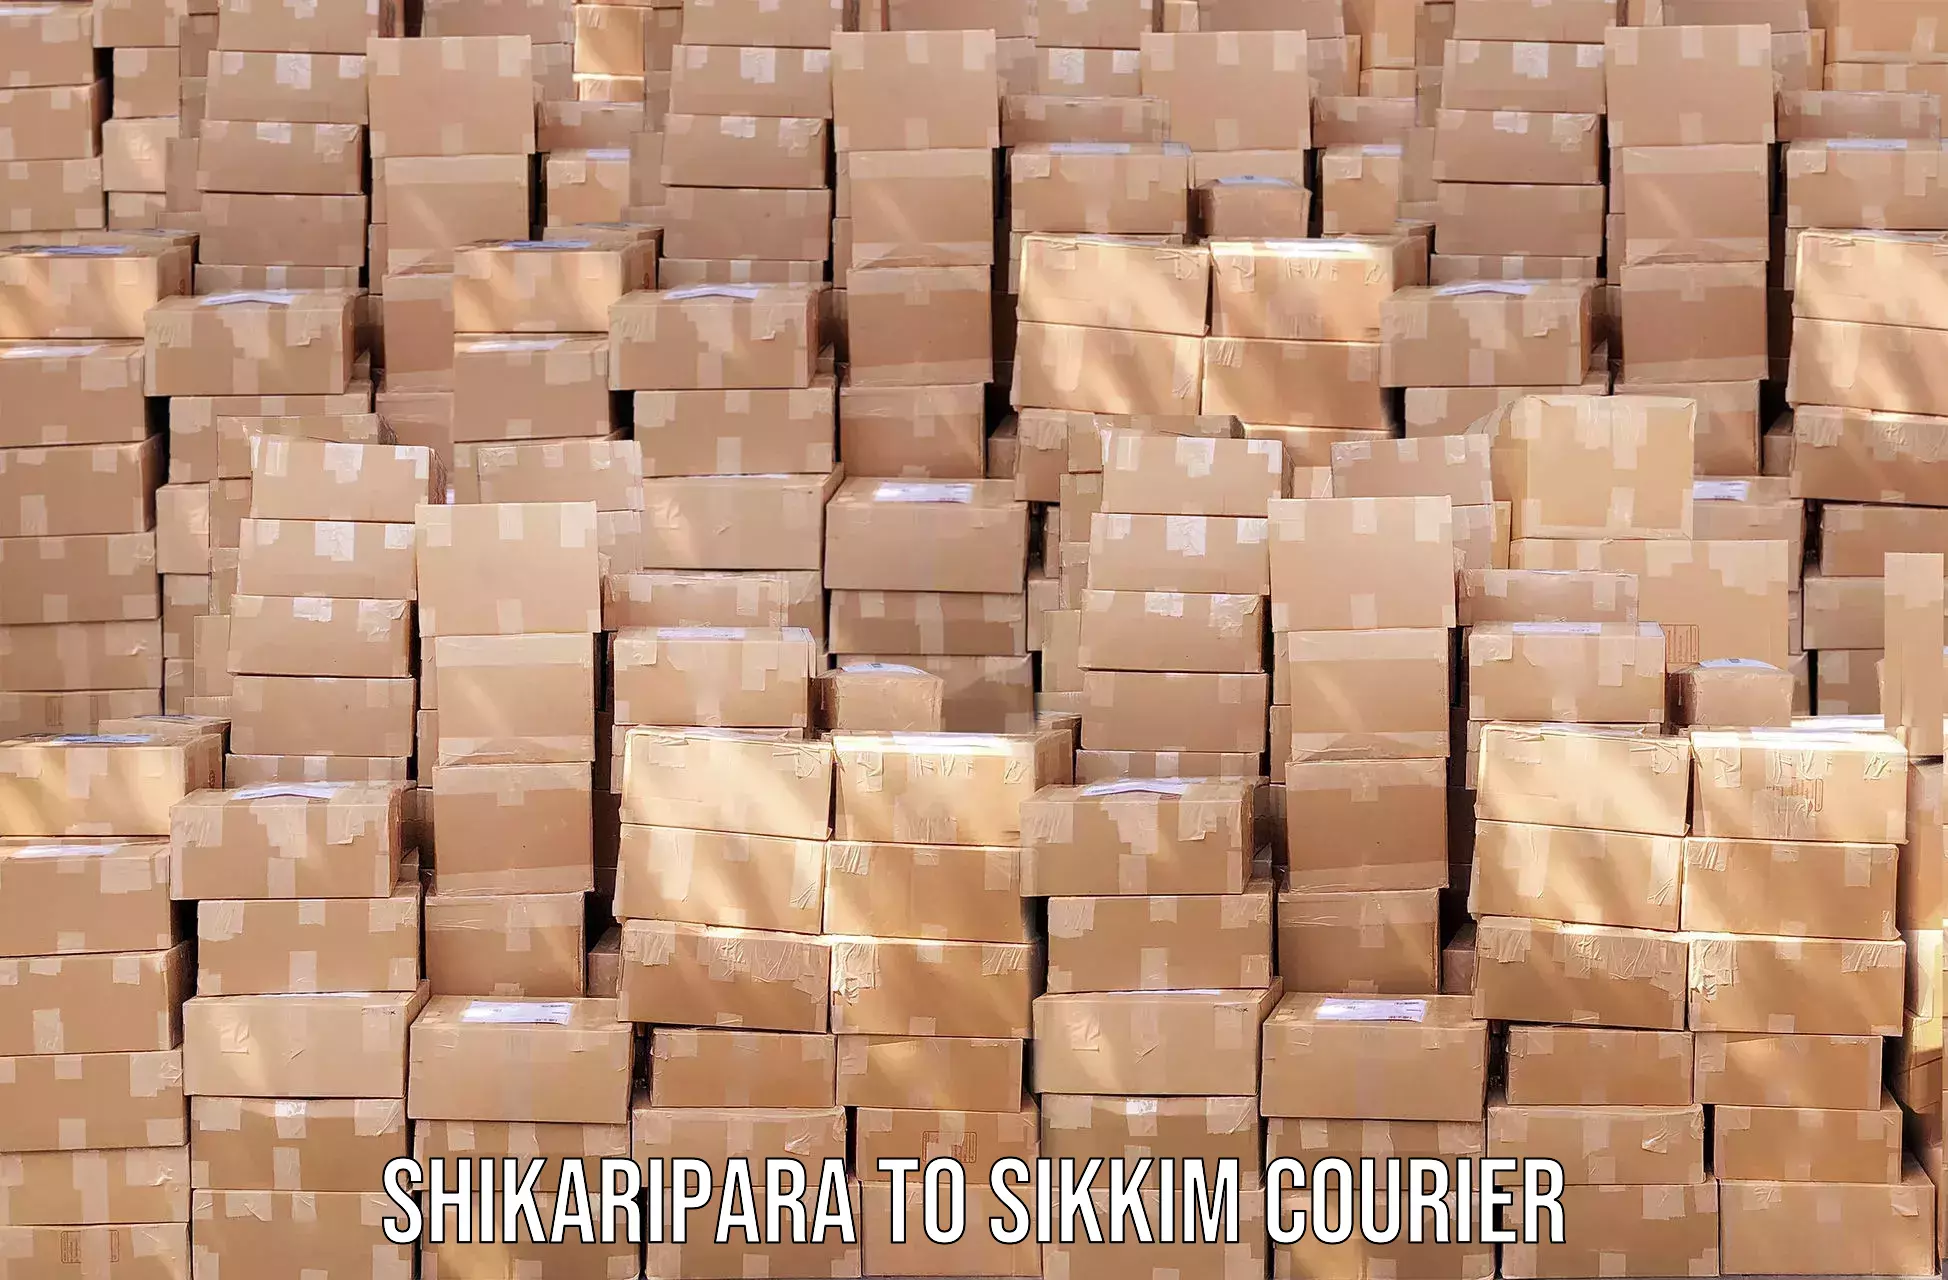 User-friendly delivery service Shikaripara to Sikkim